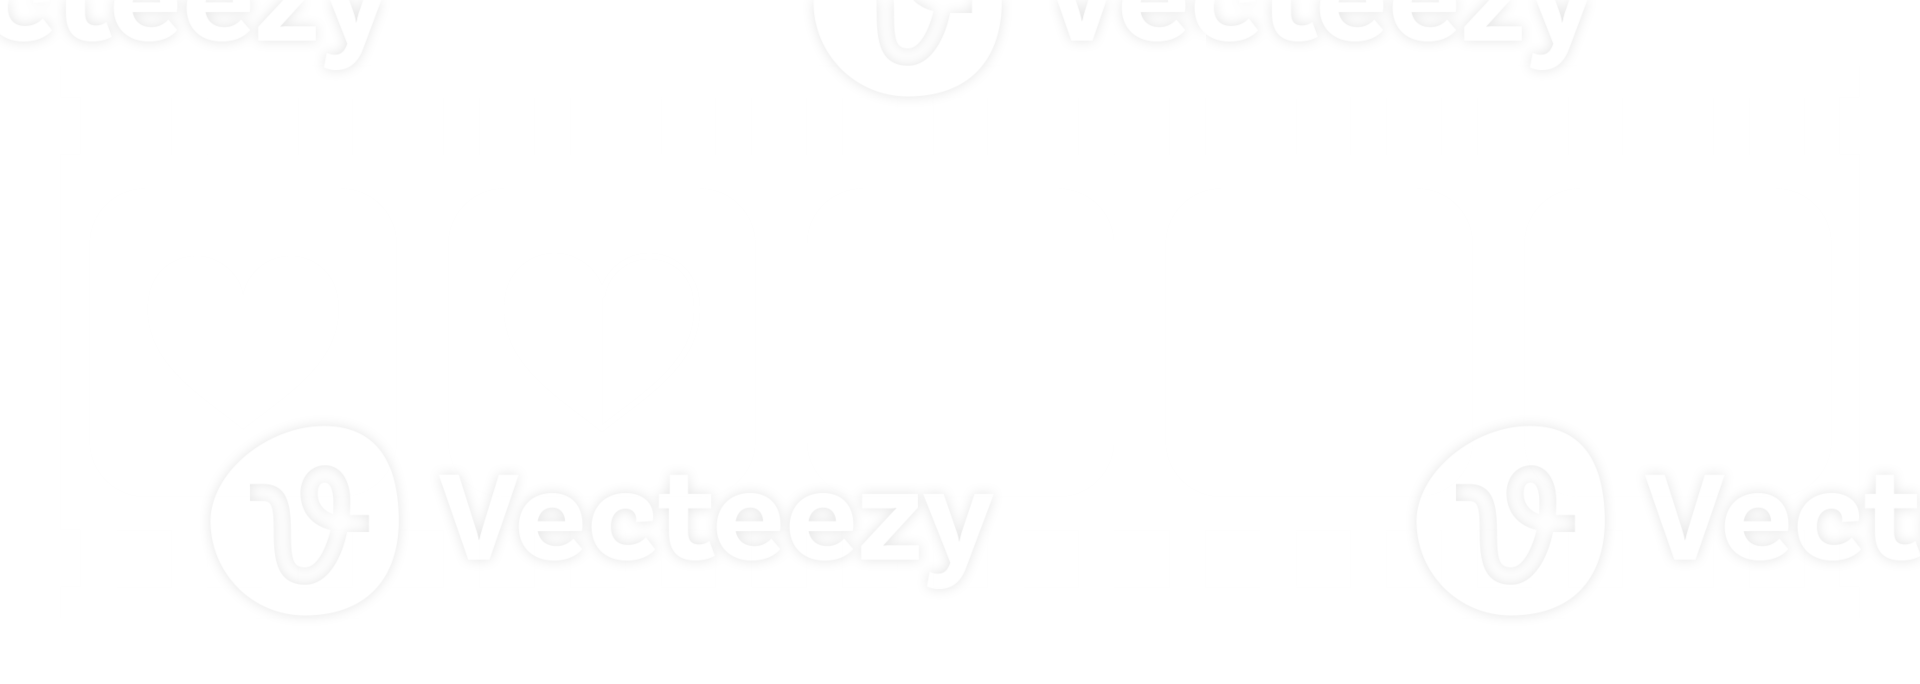 Heart Shape in the Filmstrip Silhouette, Movie Sign for Romantic or Romance or Valentine Series,  Love or Like Rating Level Icon Symbol for Romanticism Movie Story. Format PNG